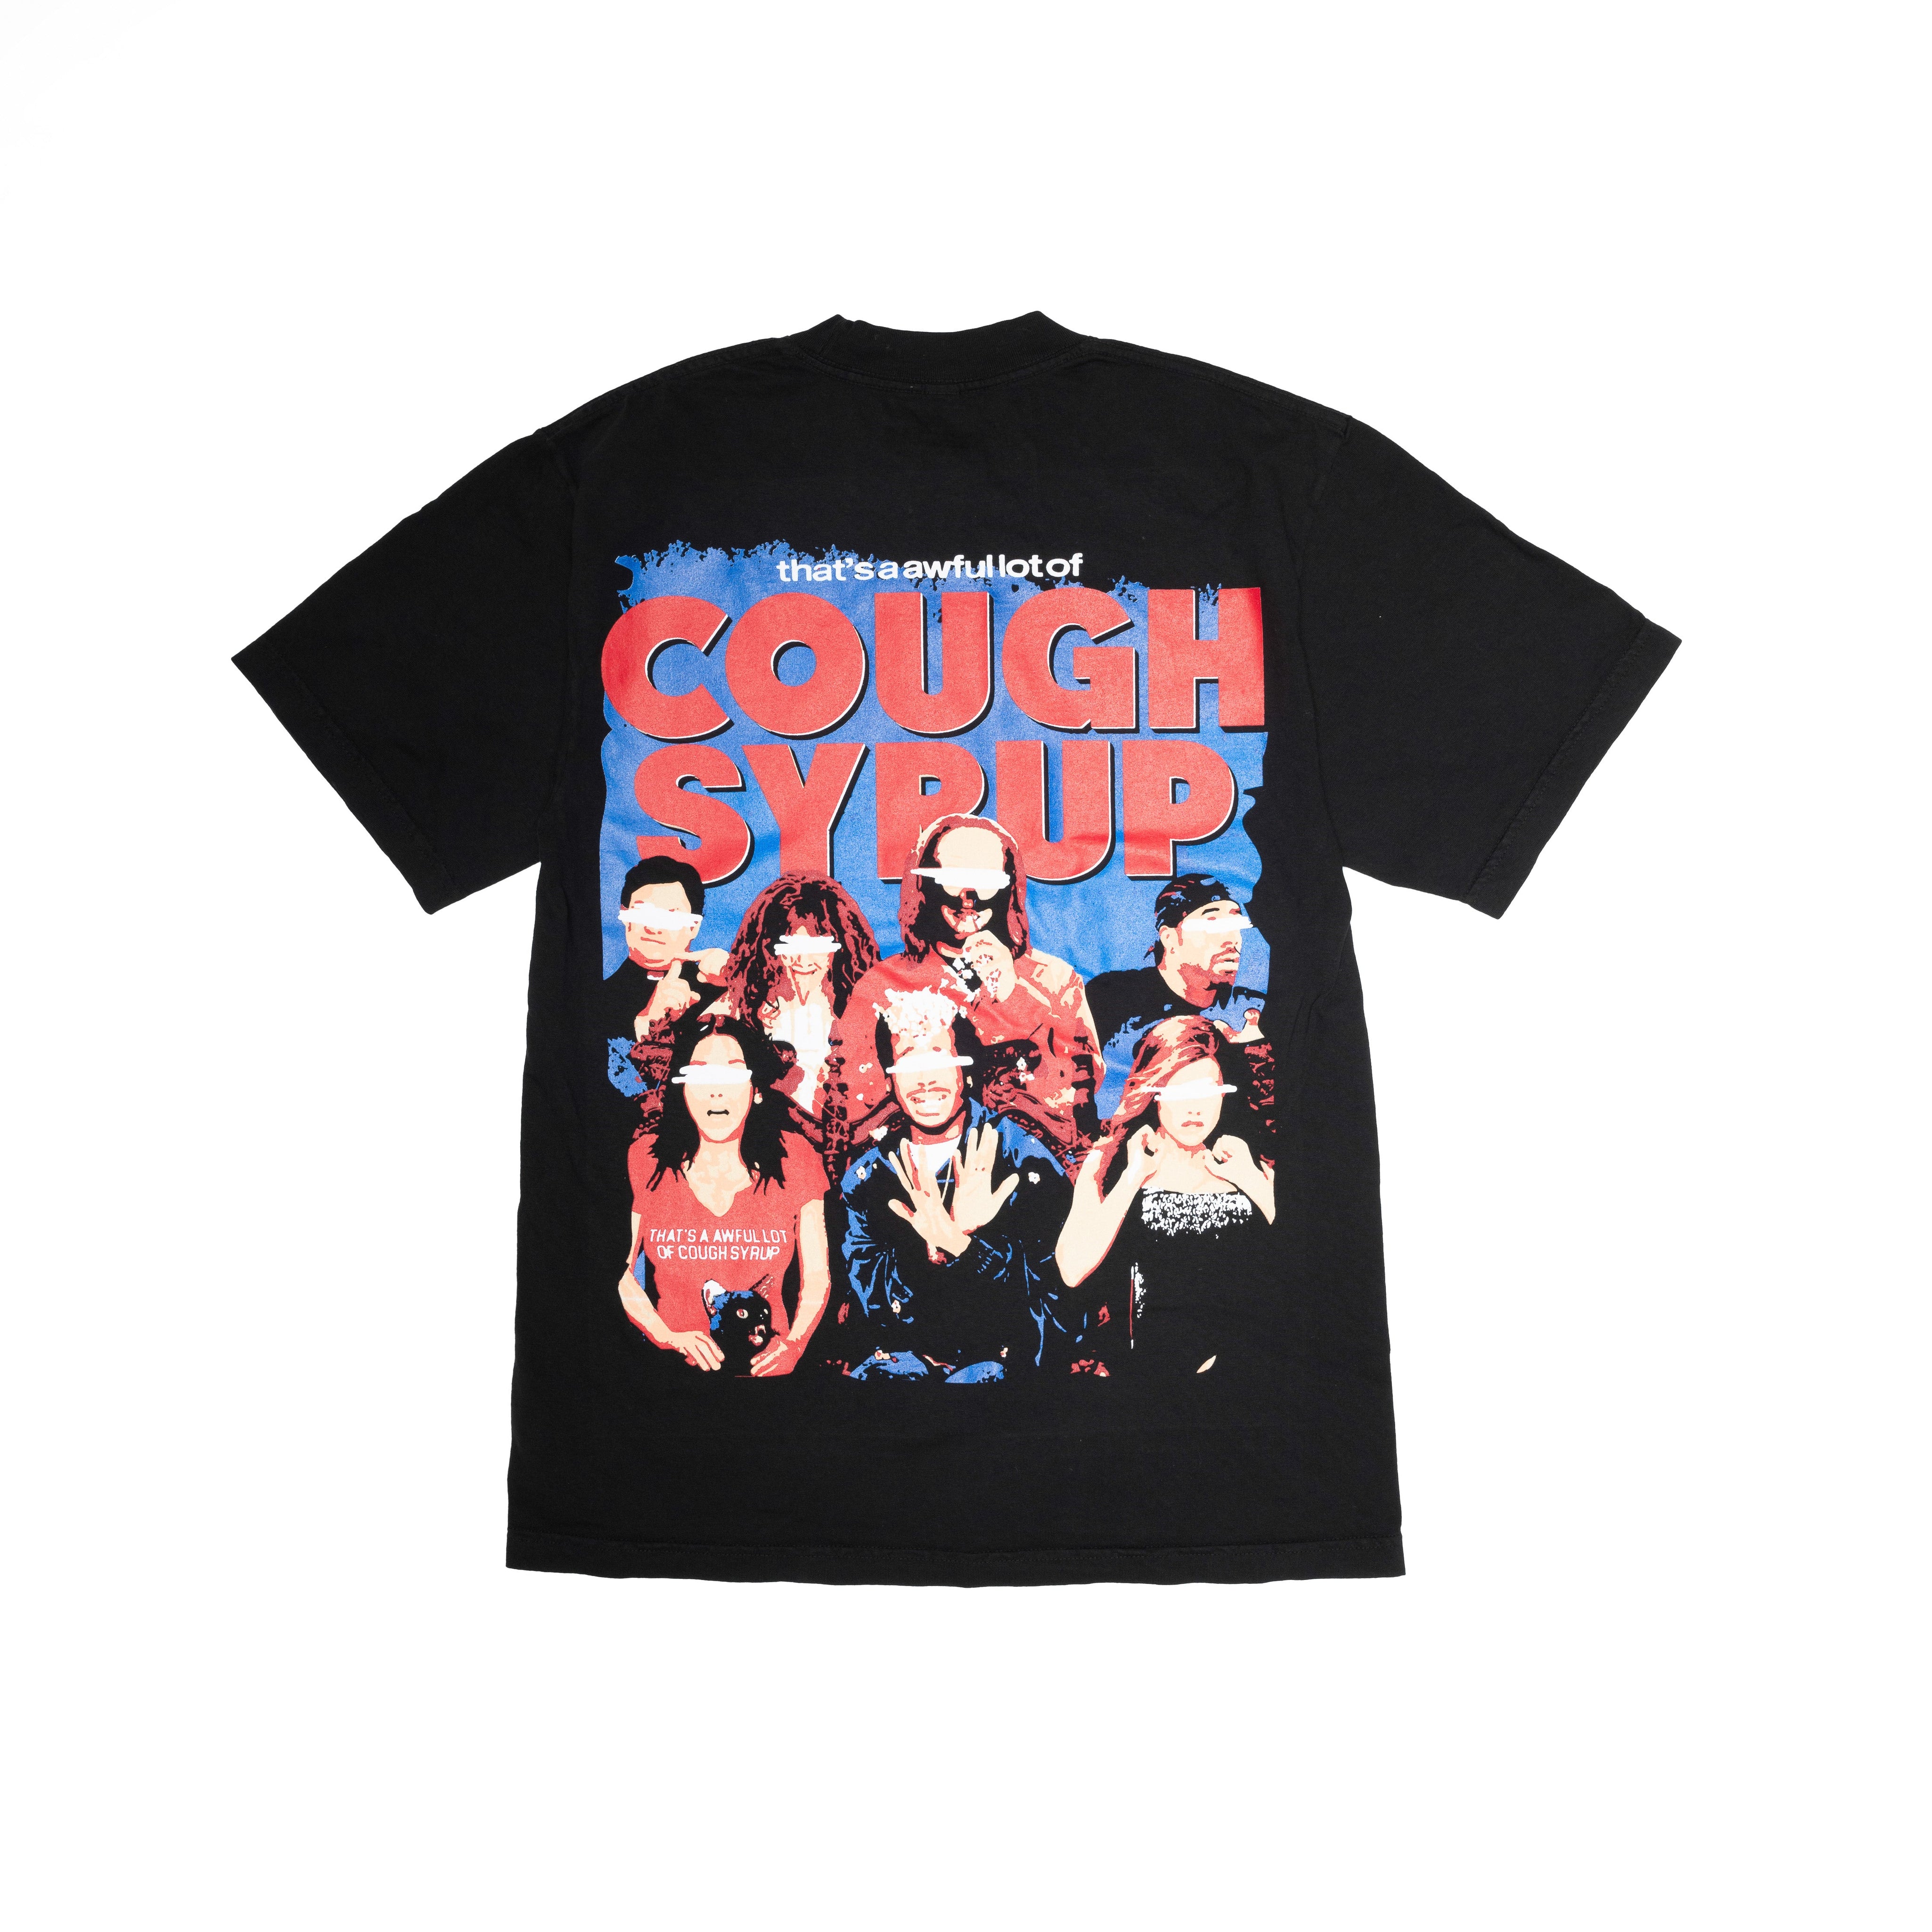 Cough Syrup Scary Movie Tee By Desto Dubb